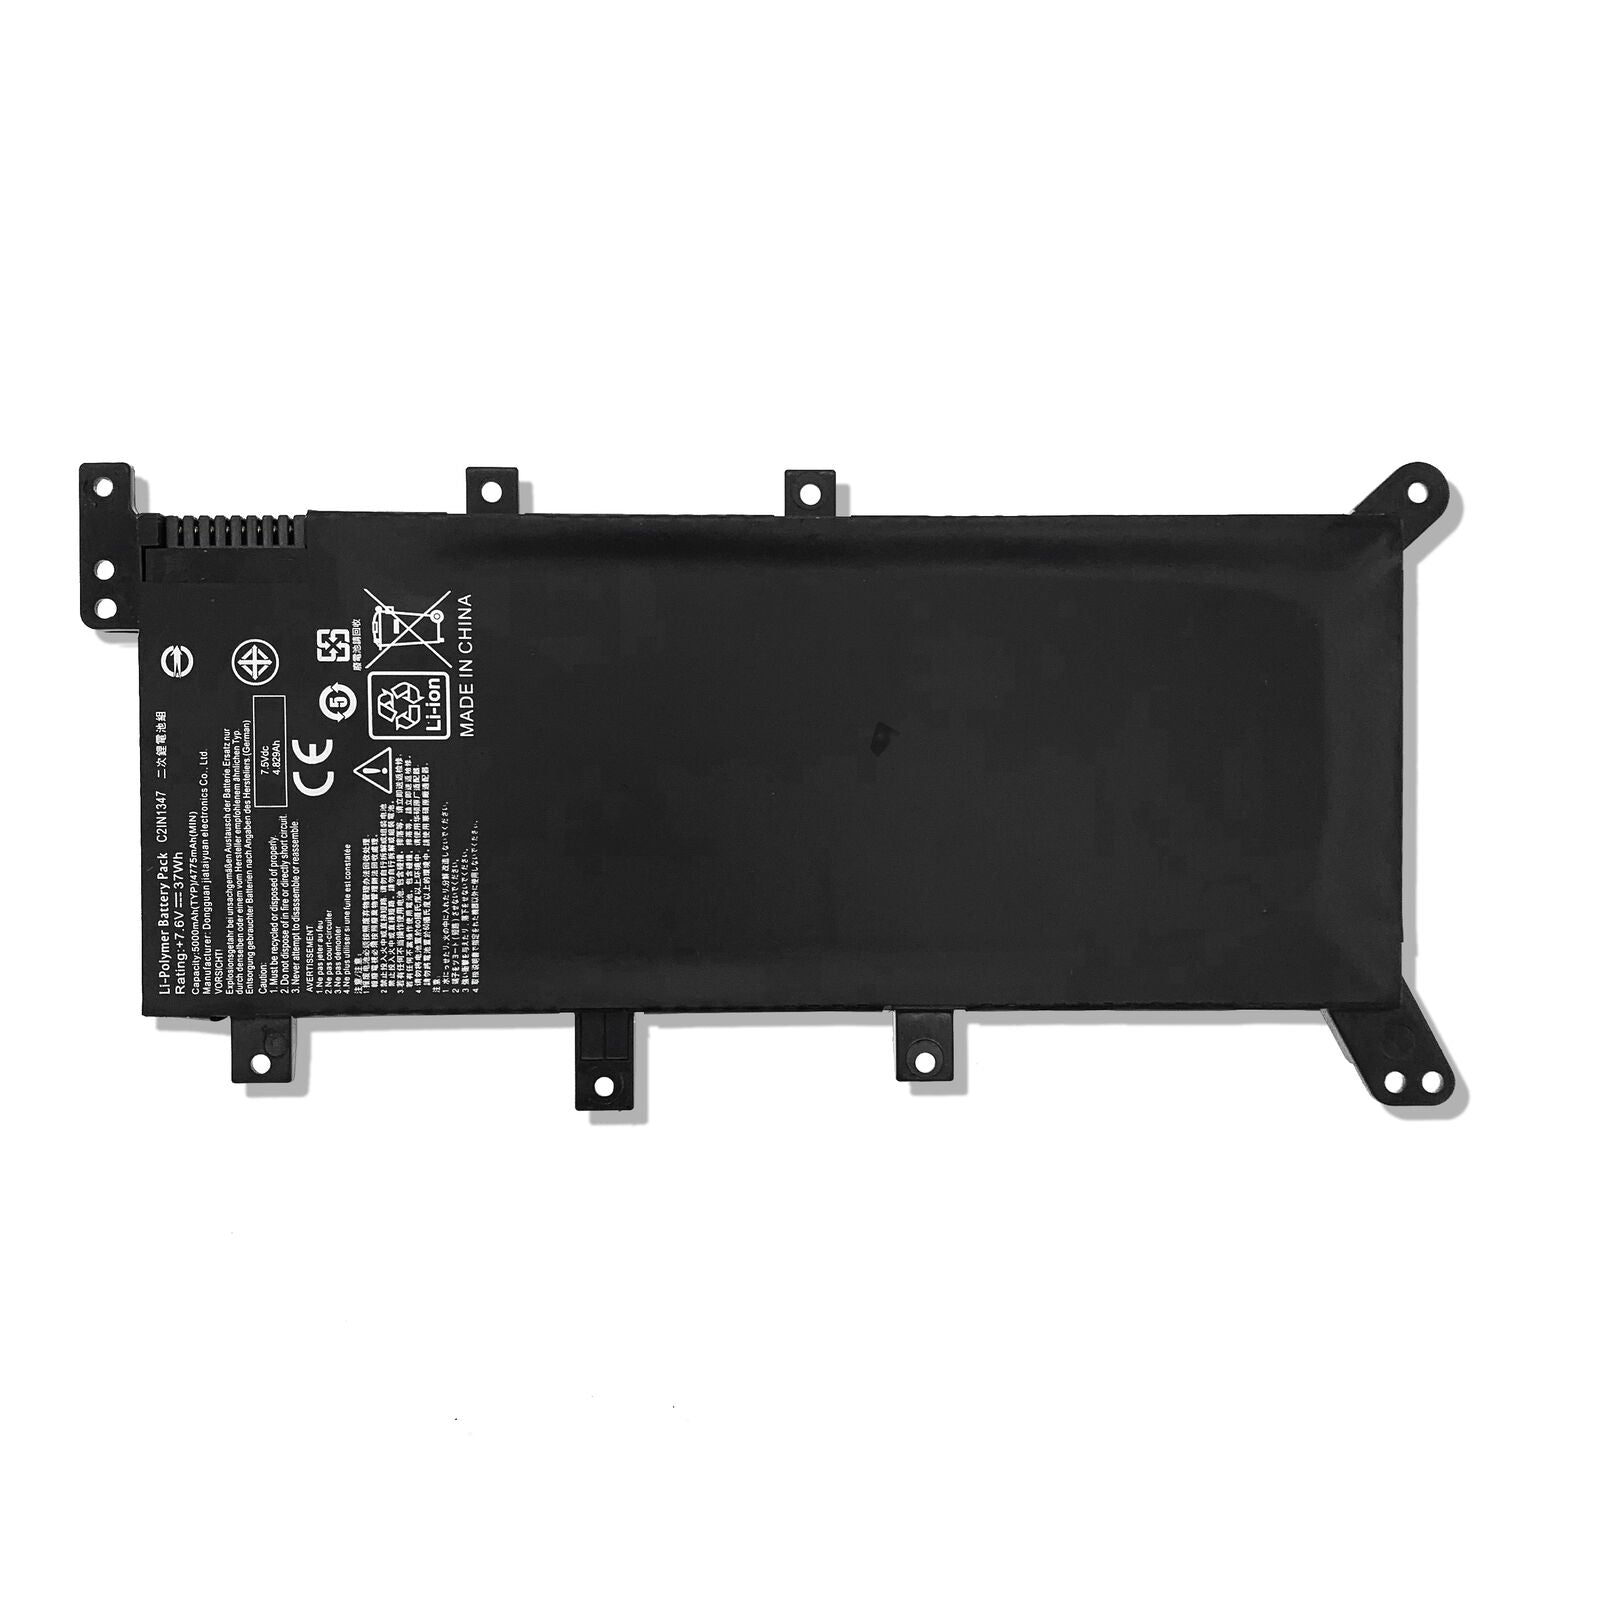 7.6V 38Wh C21N1347 OEM Battery Pack compatible with ASUS X555 X555LA X555LA-SI30202G X555LD X555LN Laptop Black Color - eBuy UAE